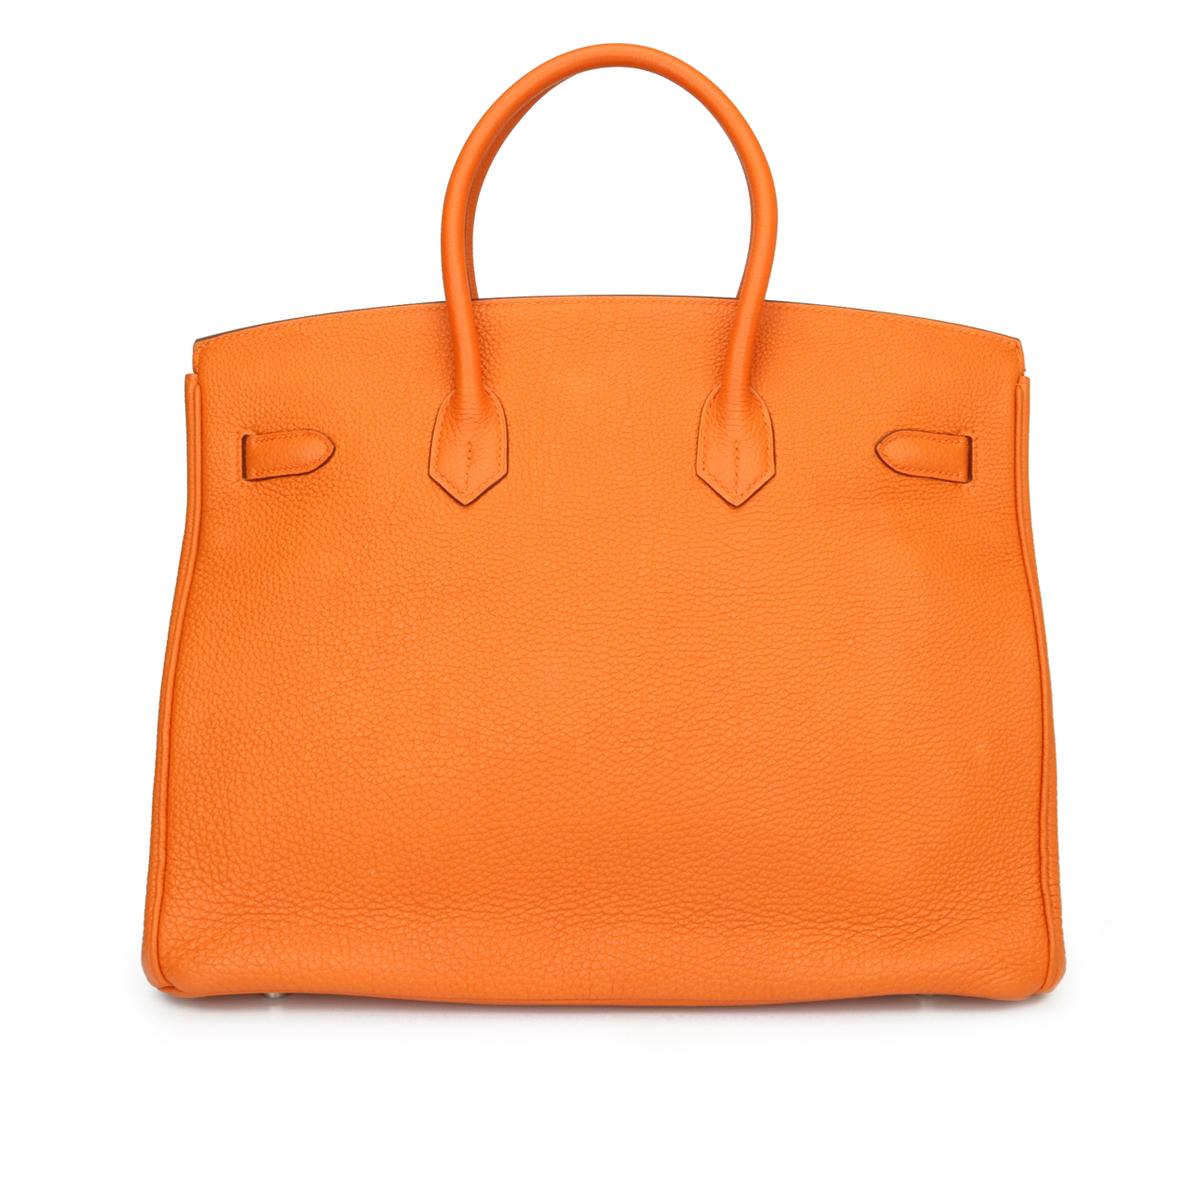 Authentic Hermès Birkin 35cm Orange Togo Leather with Palladium Hardware Stamp N Year 2010

This bag is still in excellent-mint condition. The bag still holds to the shape well. The hardware still very shiny and covered by the original protective